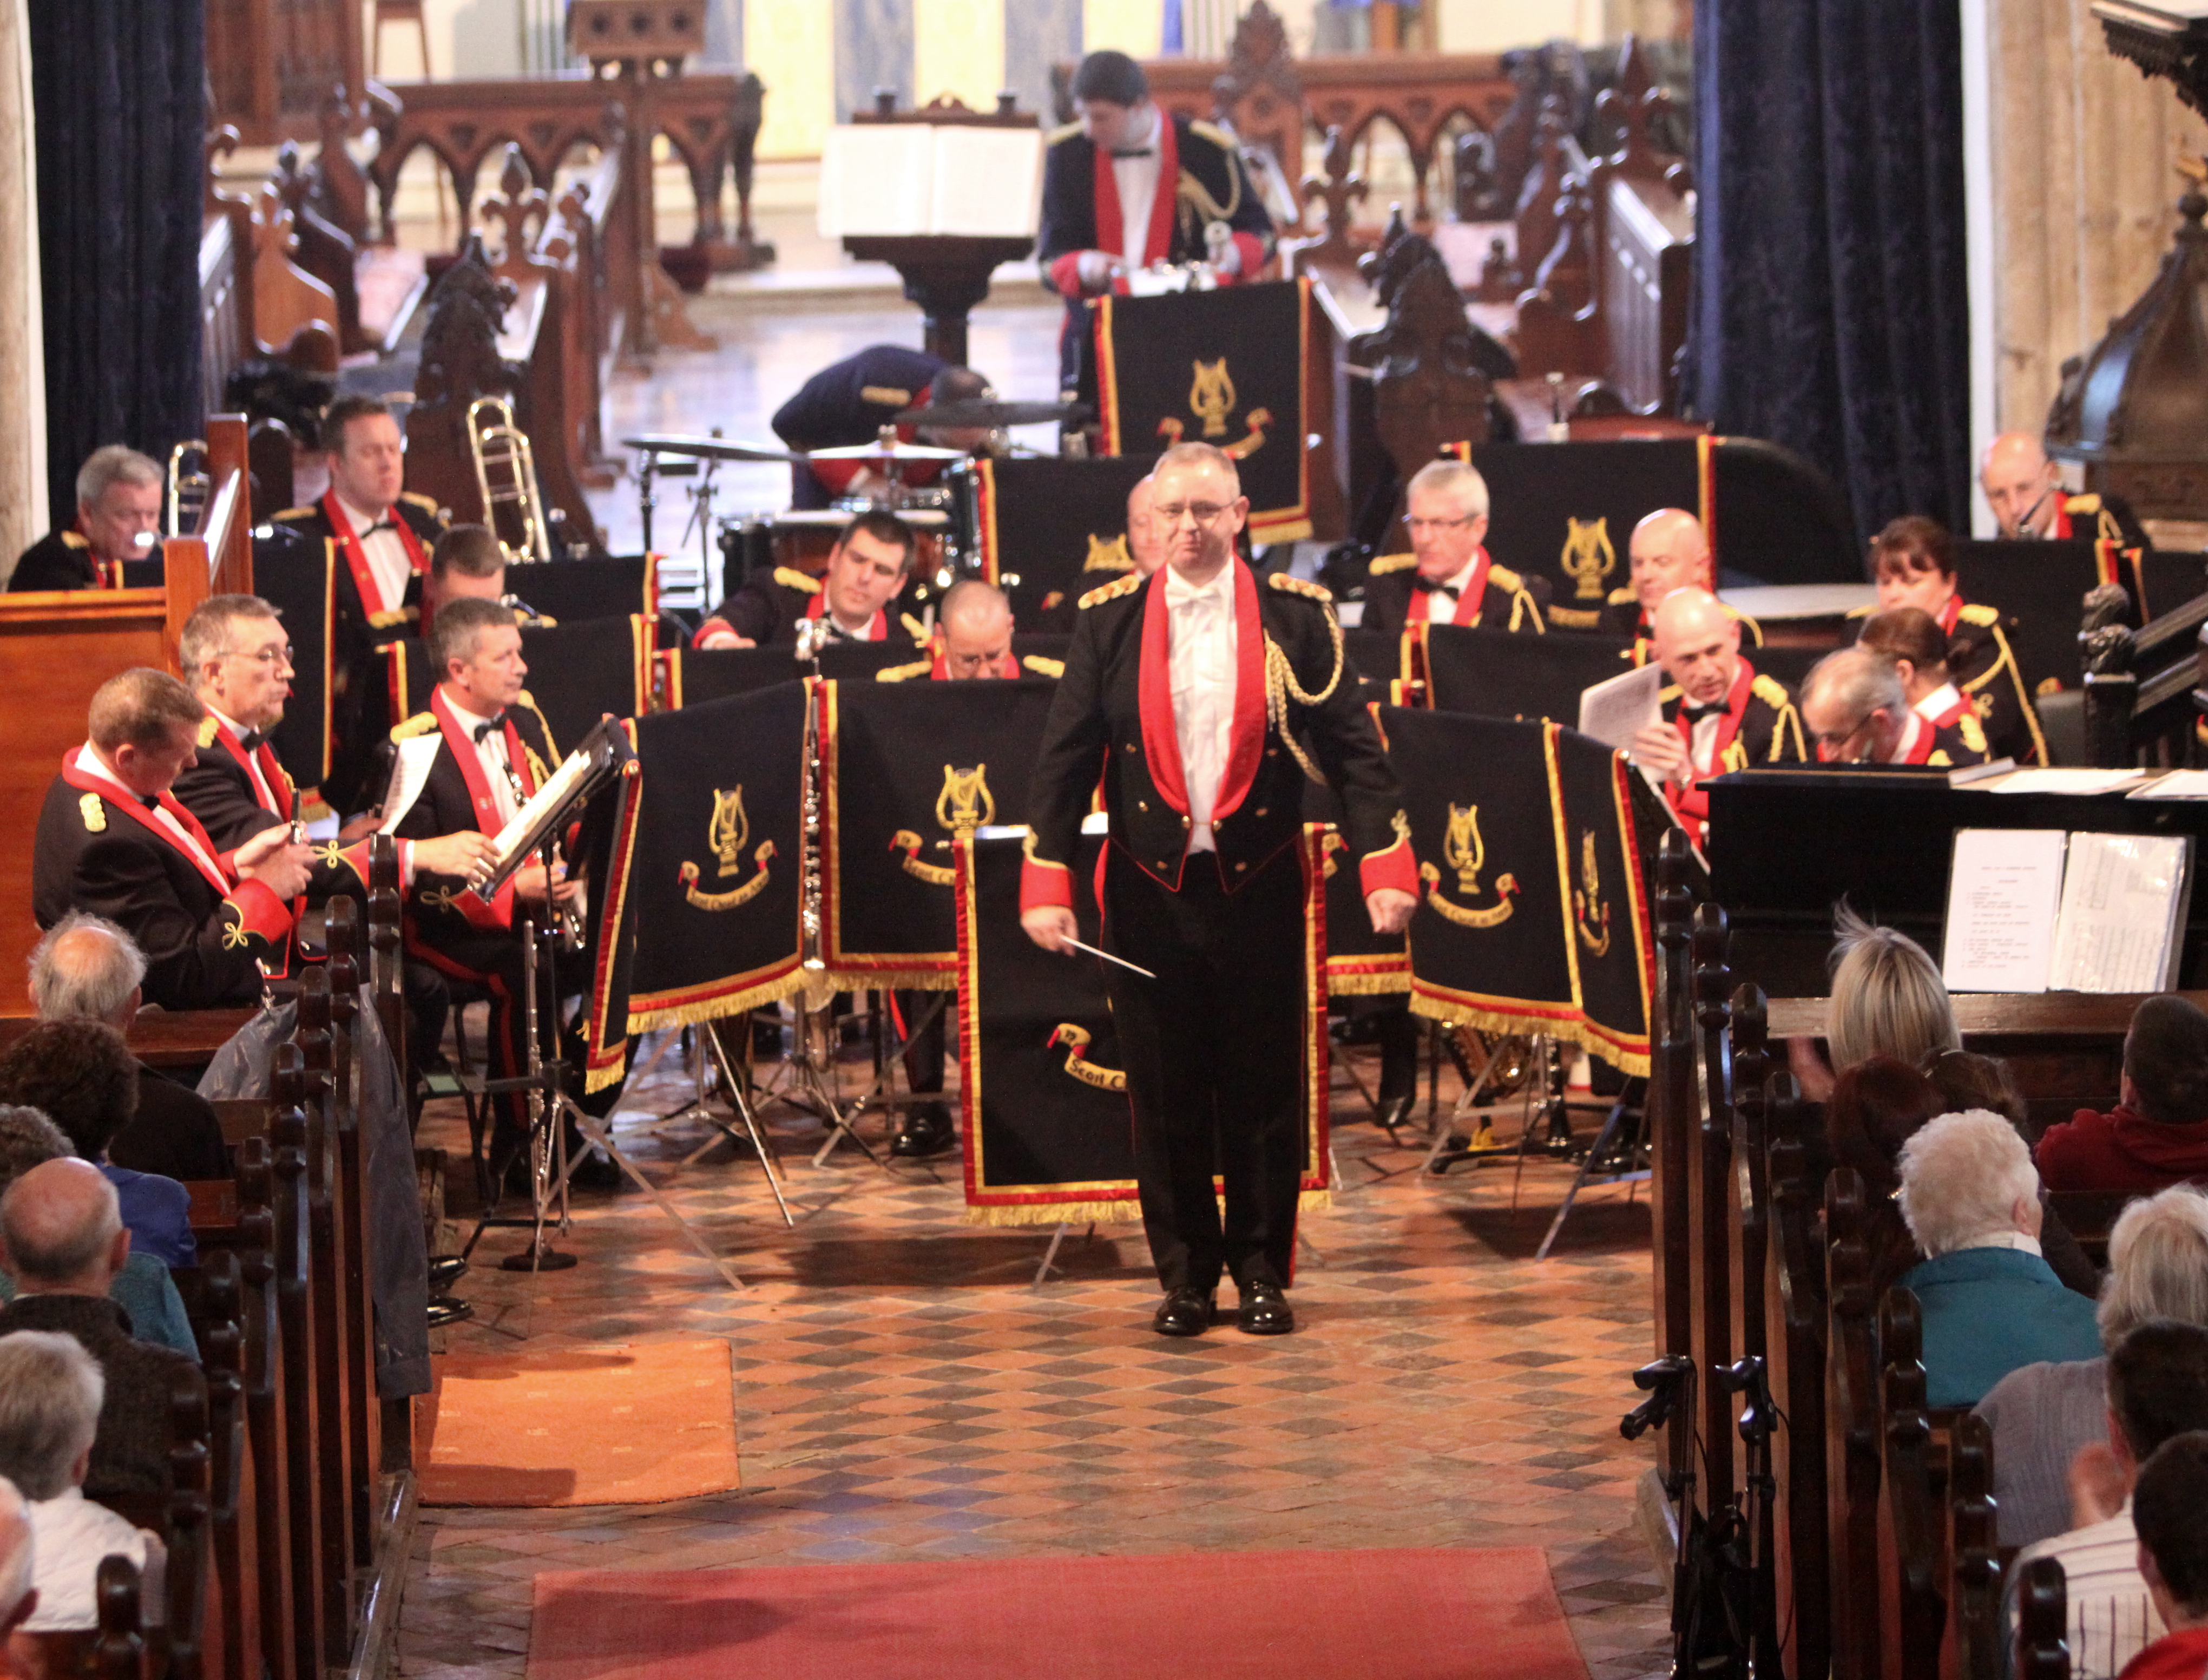 A band performing in a church.